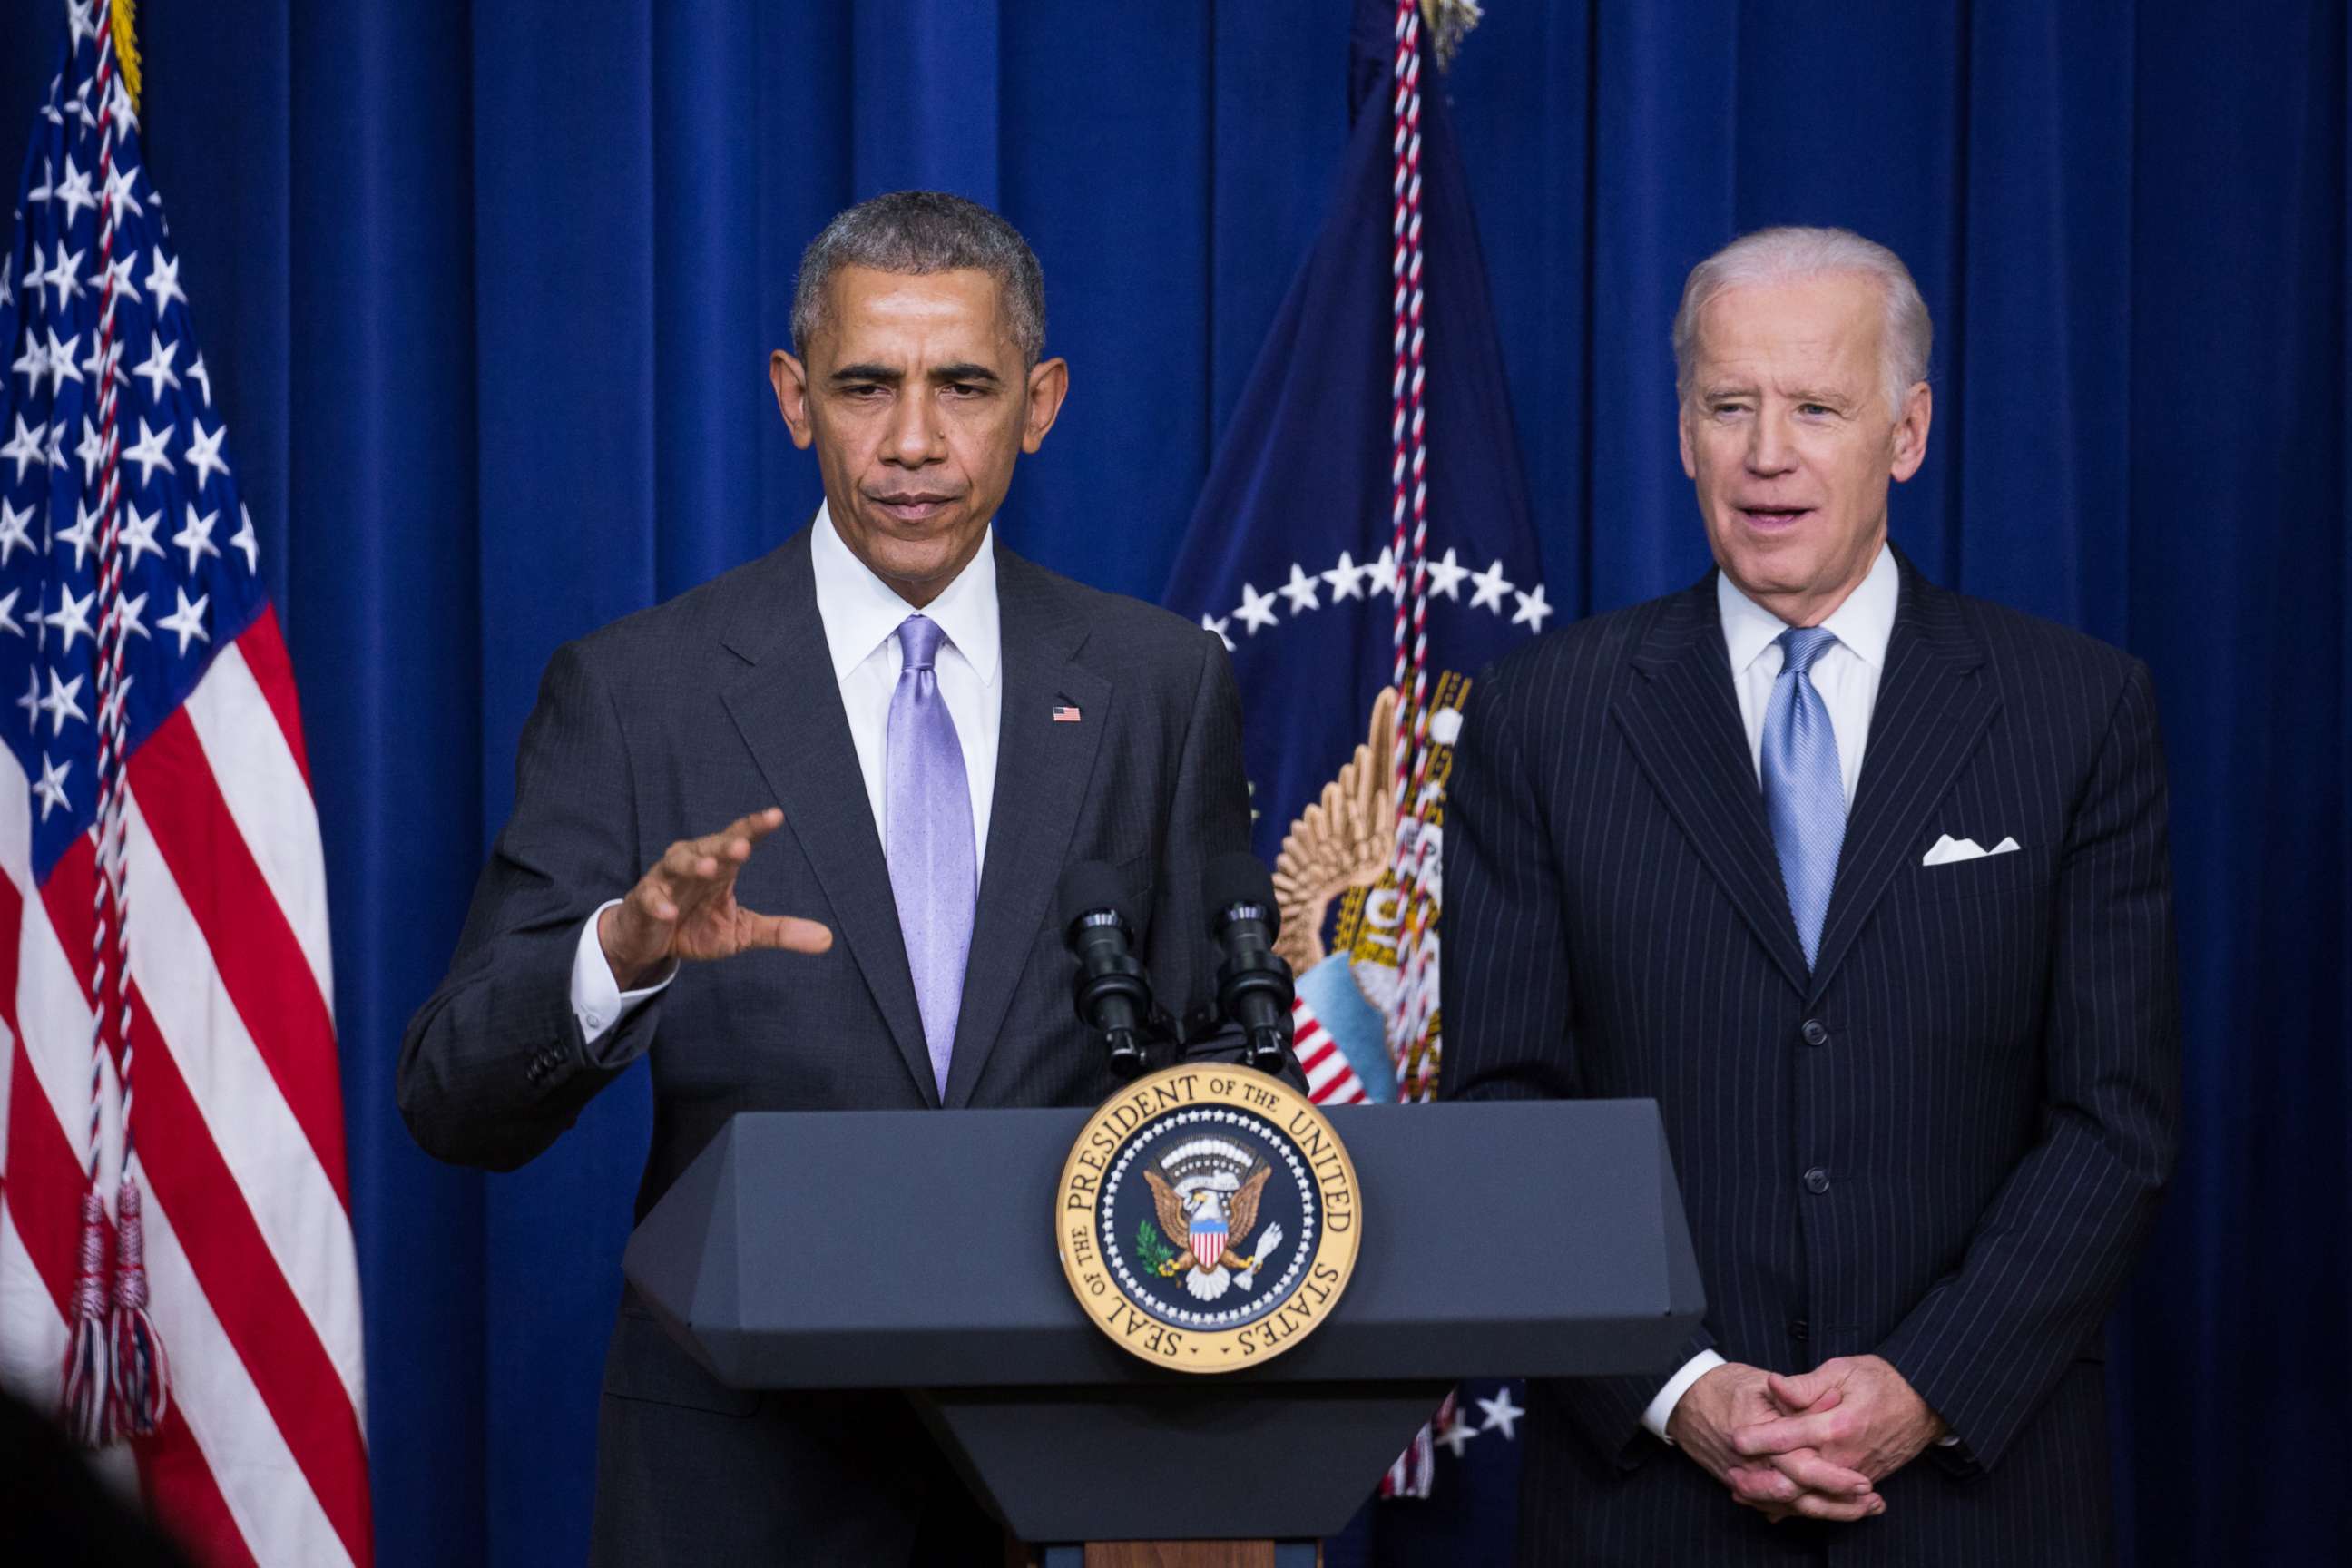 PHOTO: In this Dec. 13, 2016, file photo, President Barack Obama made remarks, with VP Joe Biden by his side, before signing the 21st Century Cures Act, in the Eisenhower Executive Office Building of the White House in Washington, D.C.